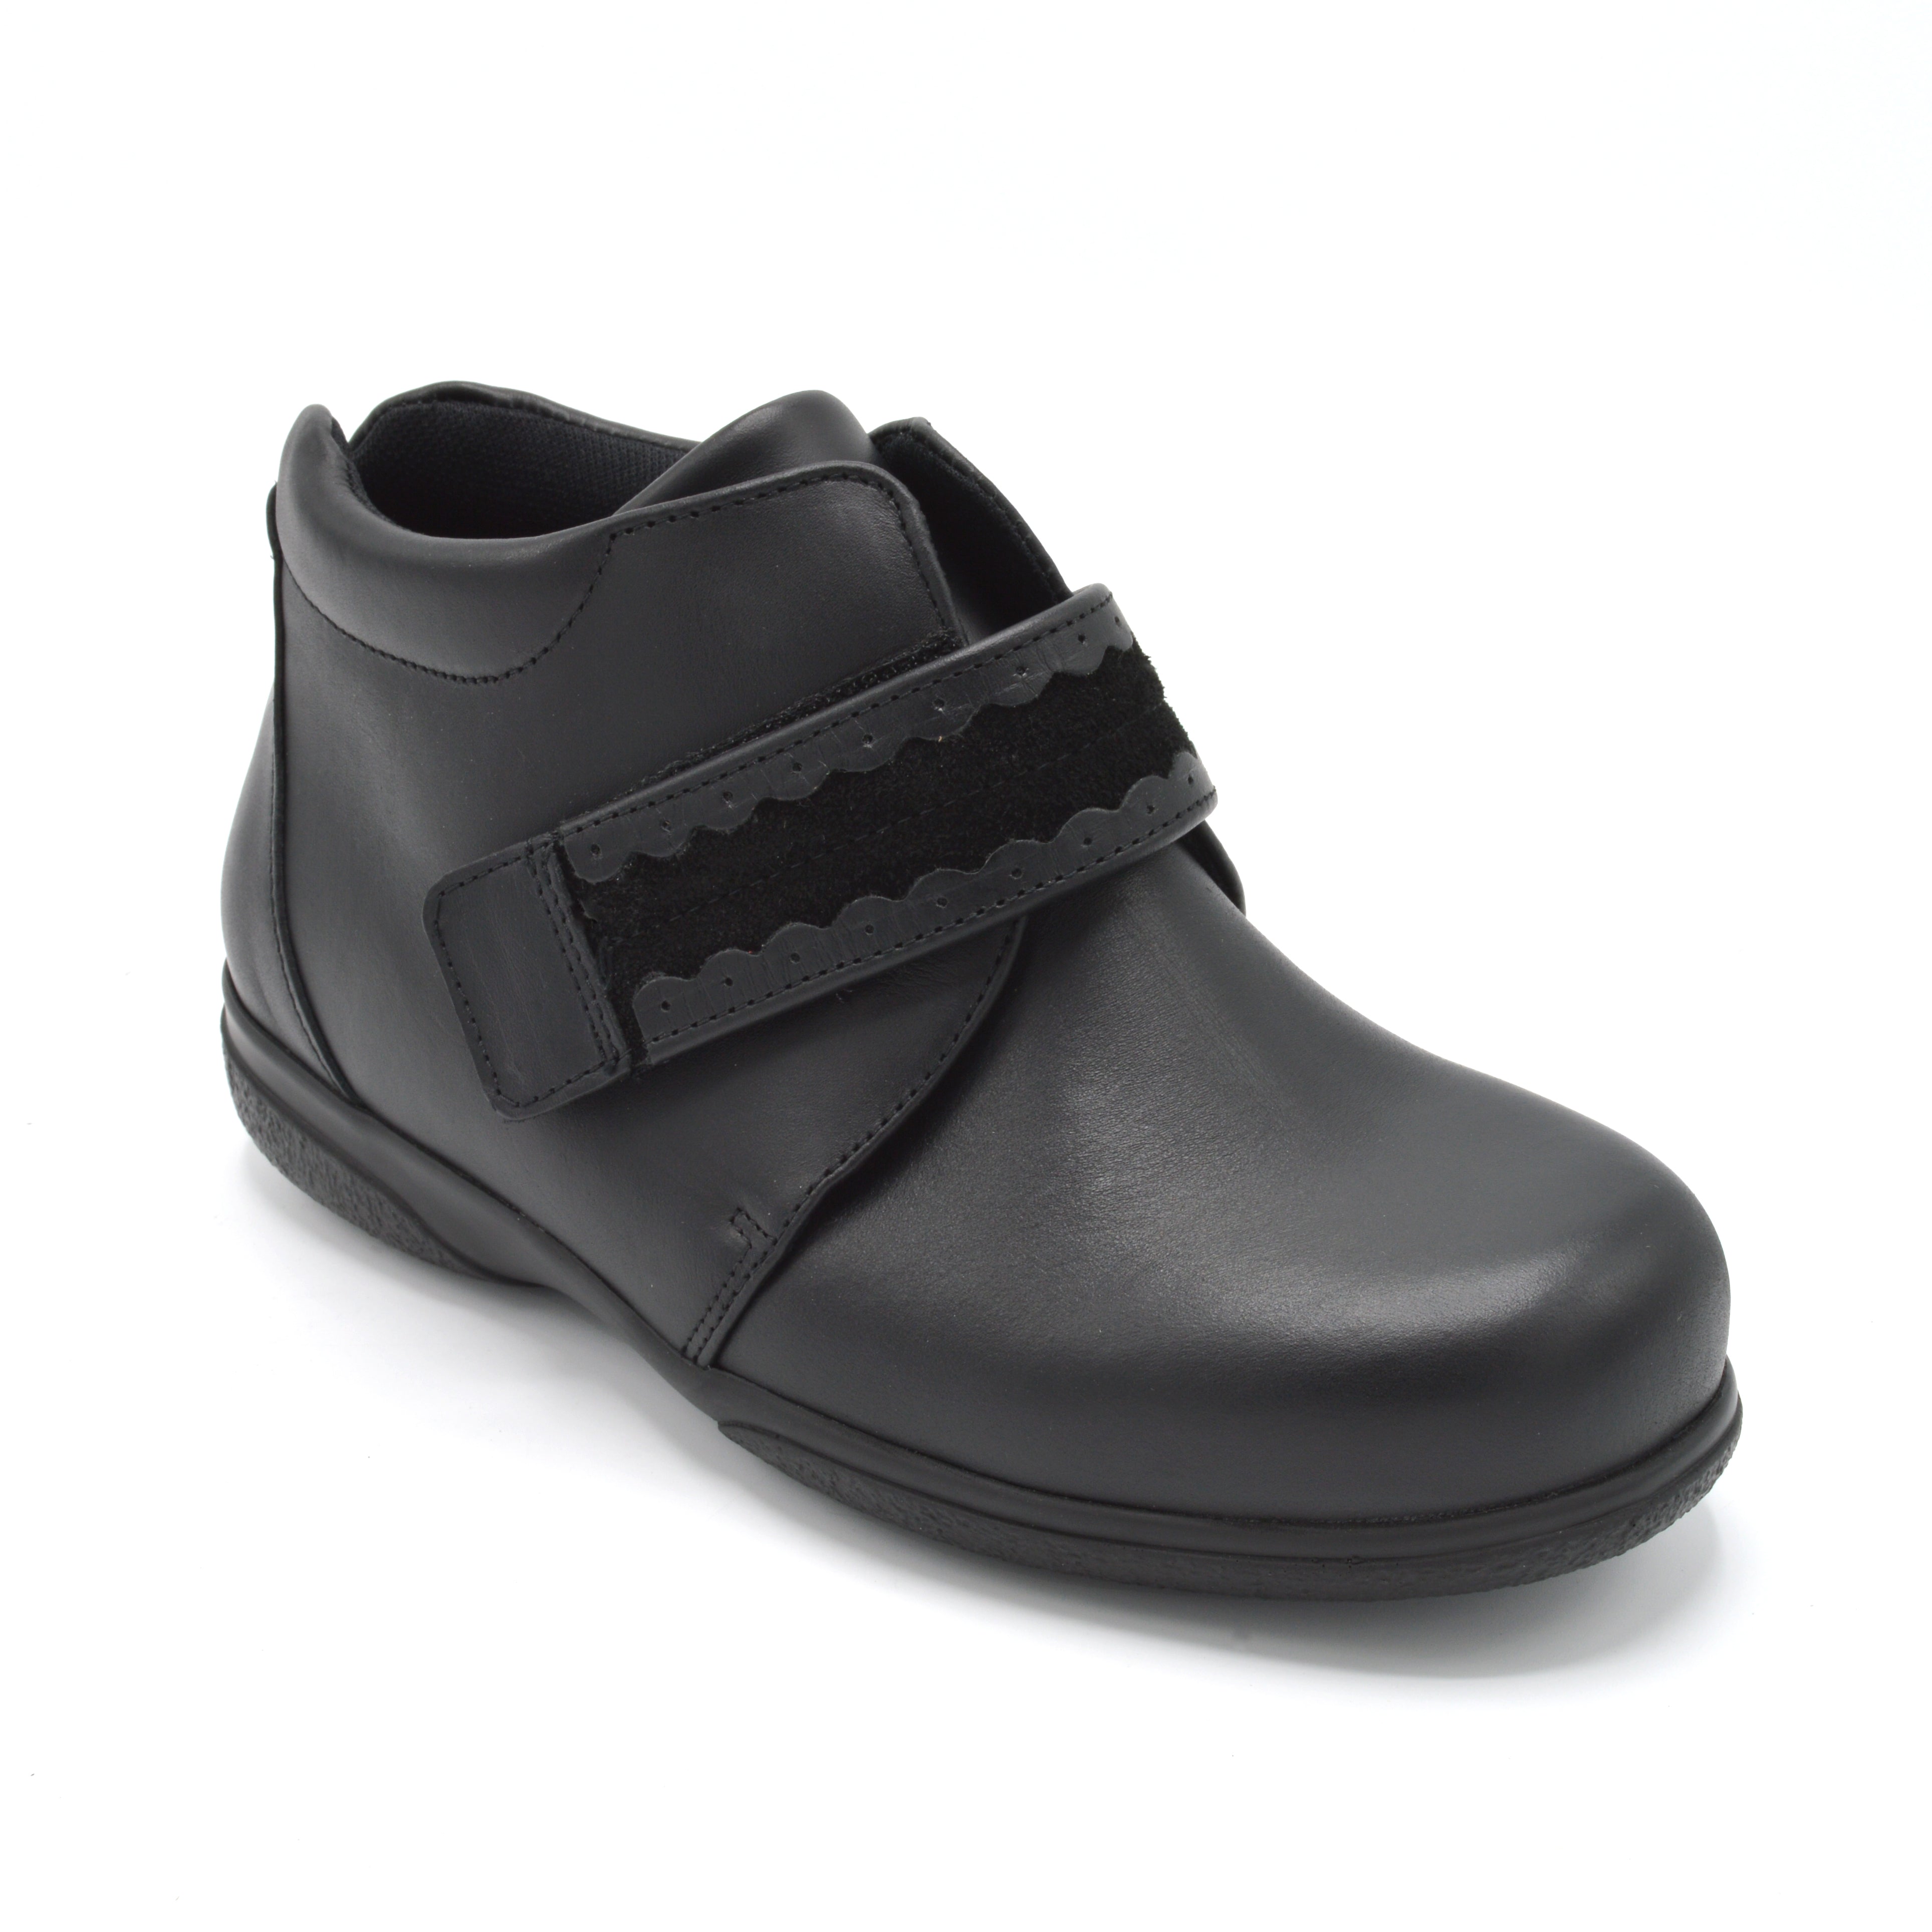 Extra Wide Black Velcro Strap Boot For Bunions